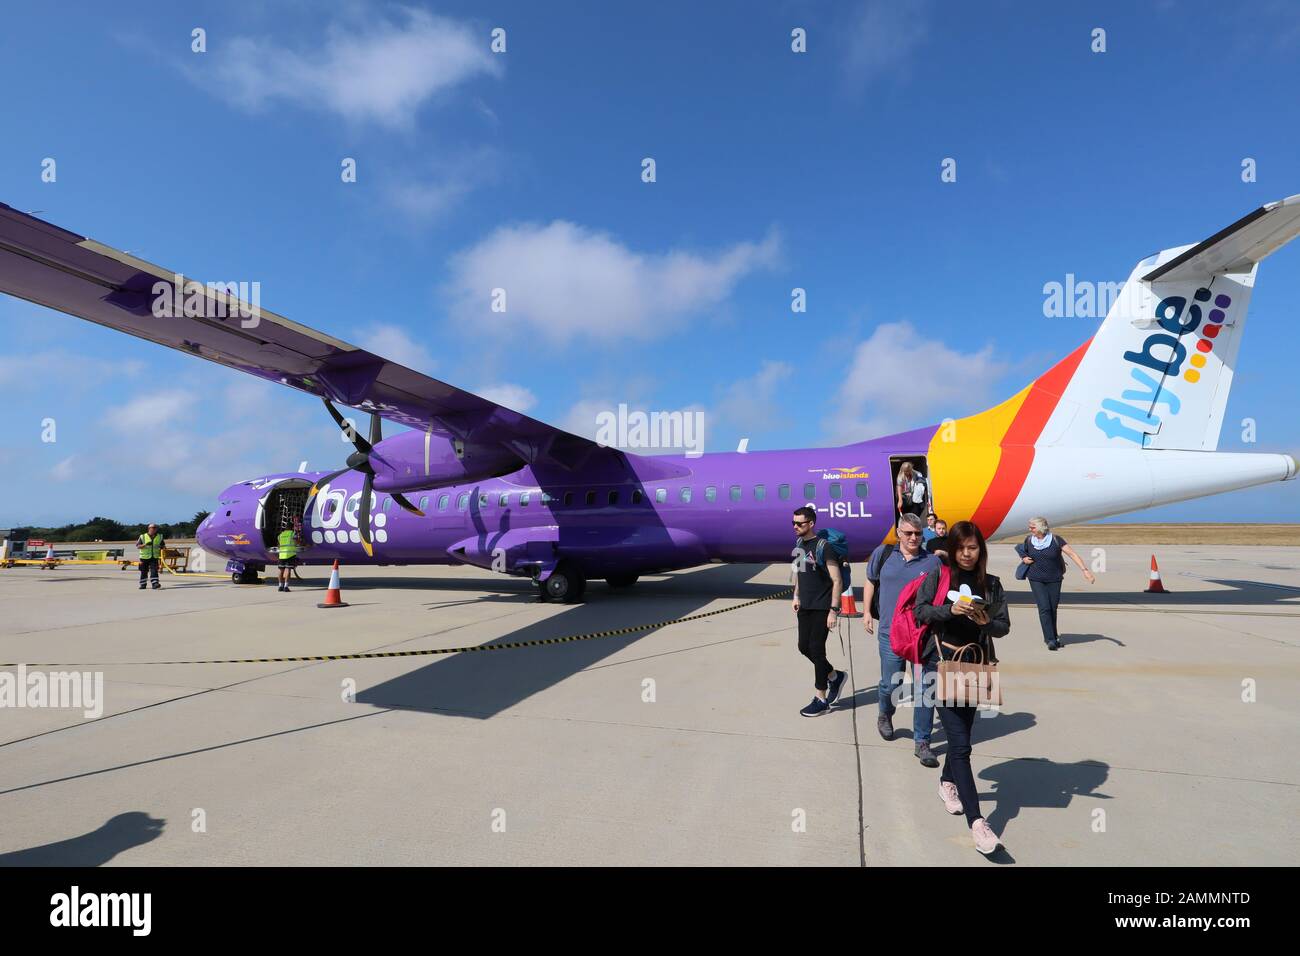 Flybe Britain's biggest regional airline on brink of bankruptcy, Jersey Airport, Channel Islands, UK, 02 August 2019, Photo by Richard Goldschmidt Stock Photo